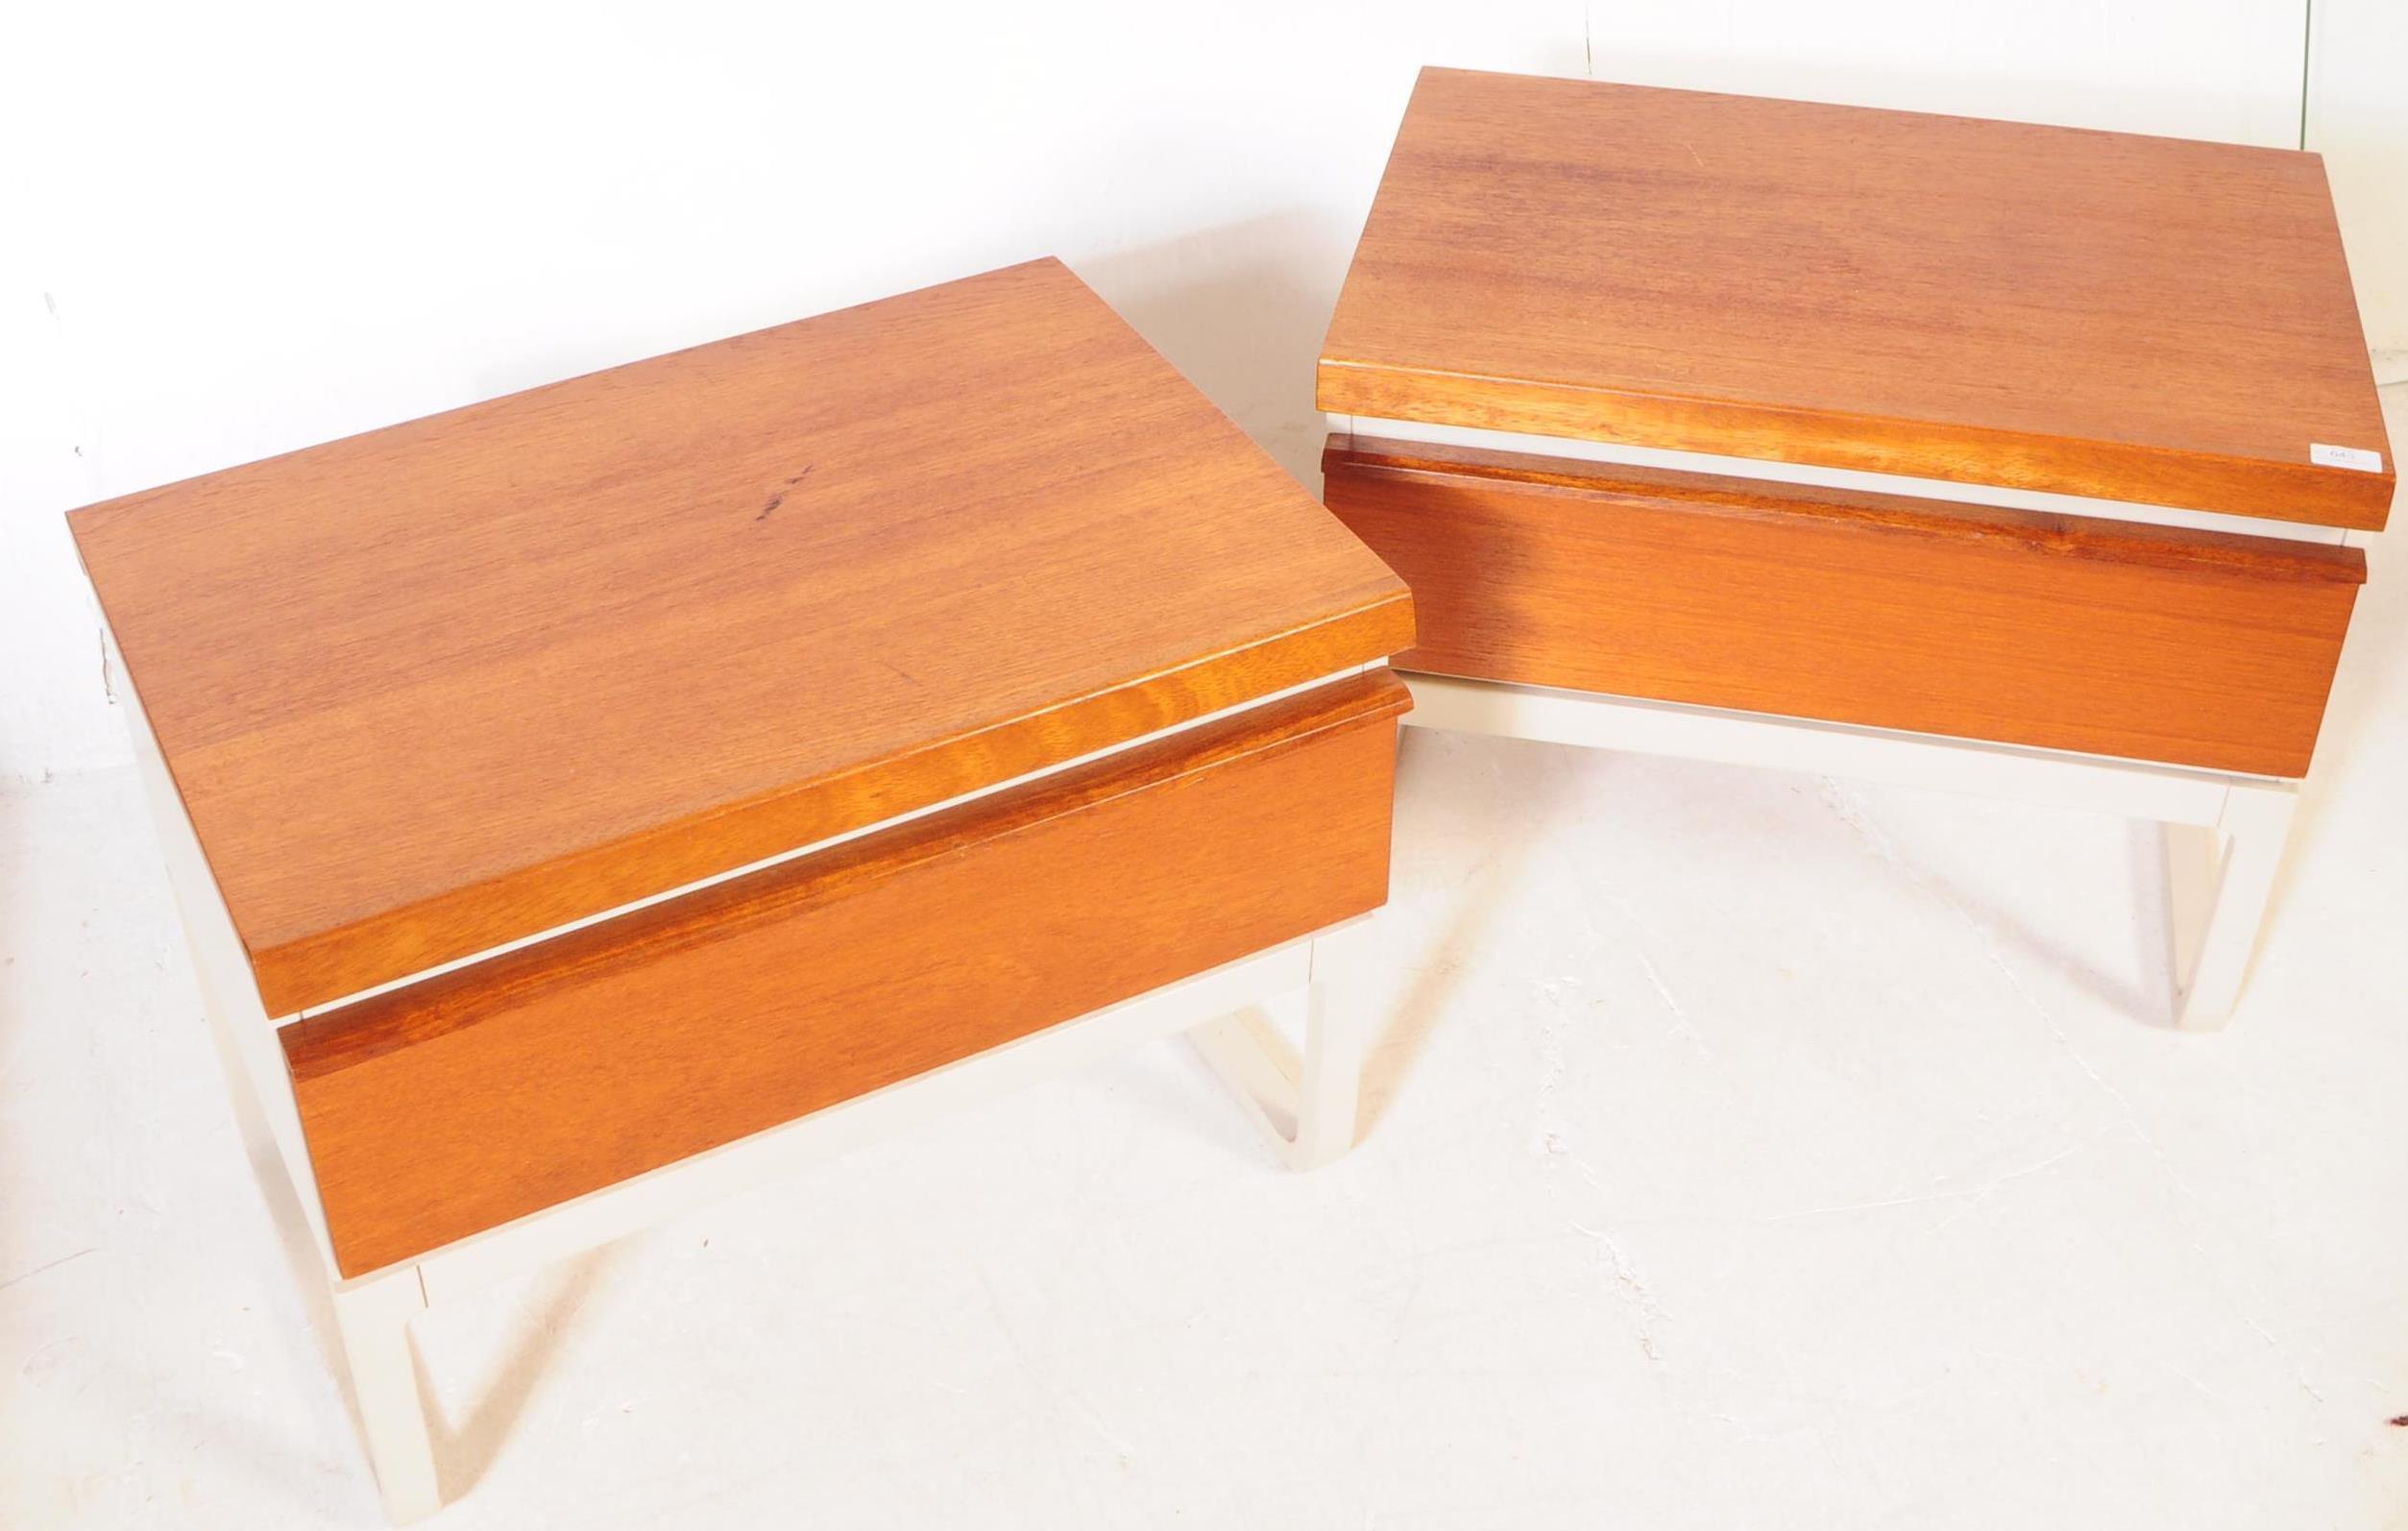 BCM BATH CABINET MAKERS 1960S BEDSIDE TABLES - Image 2 of 6